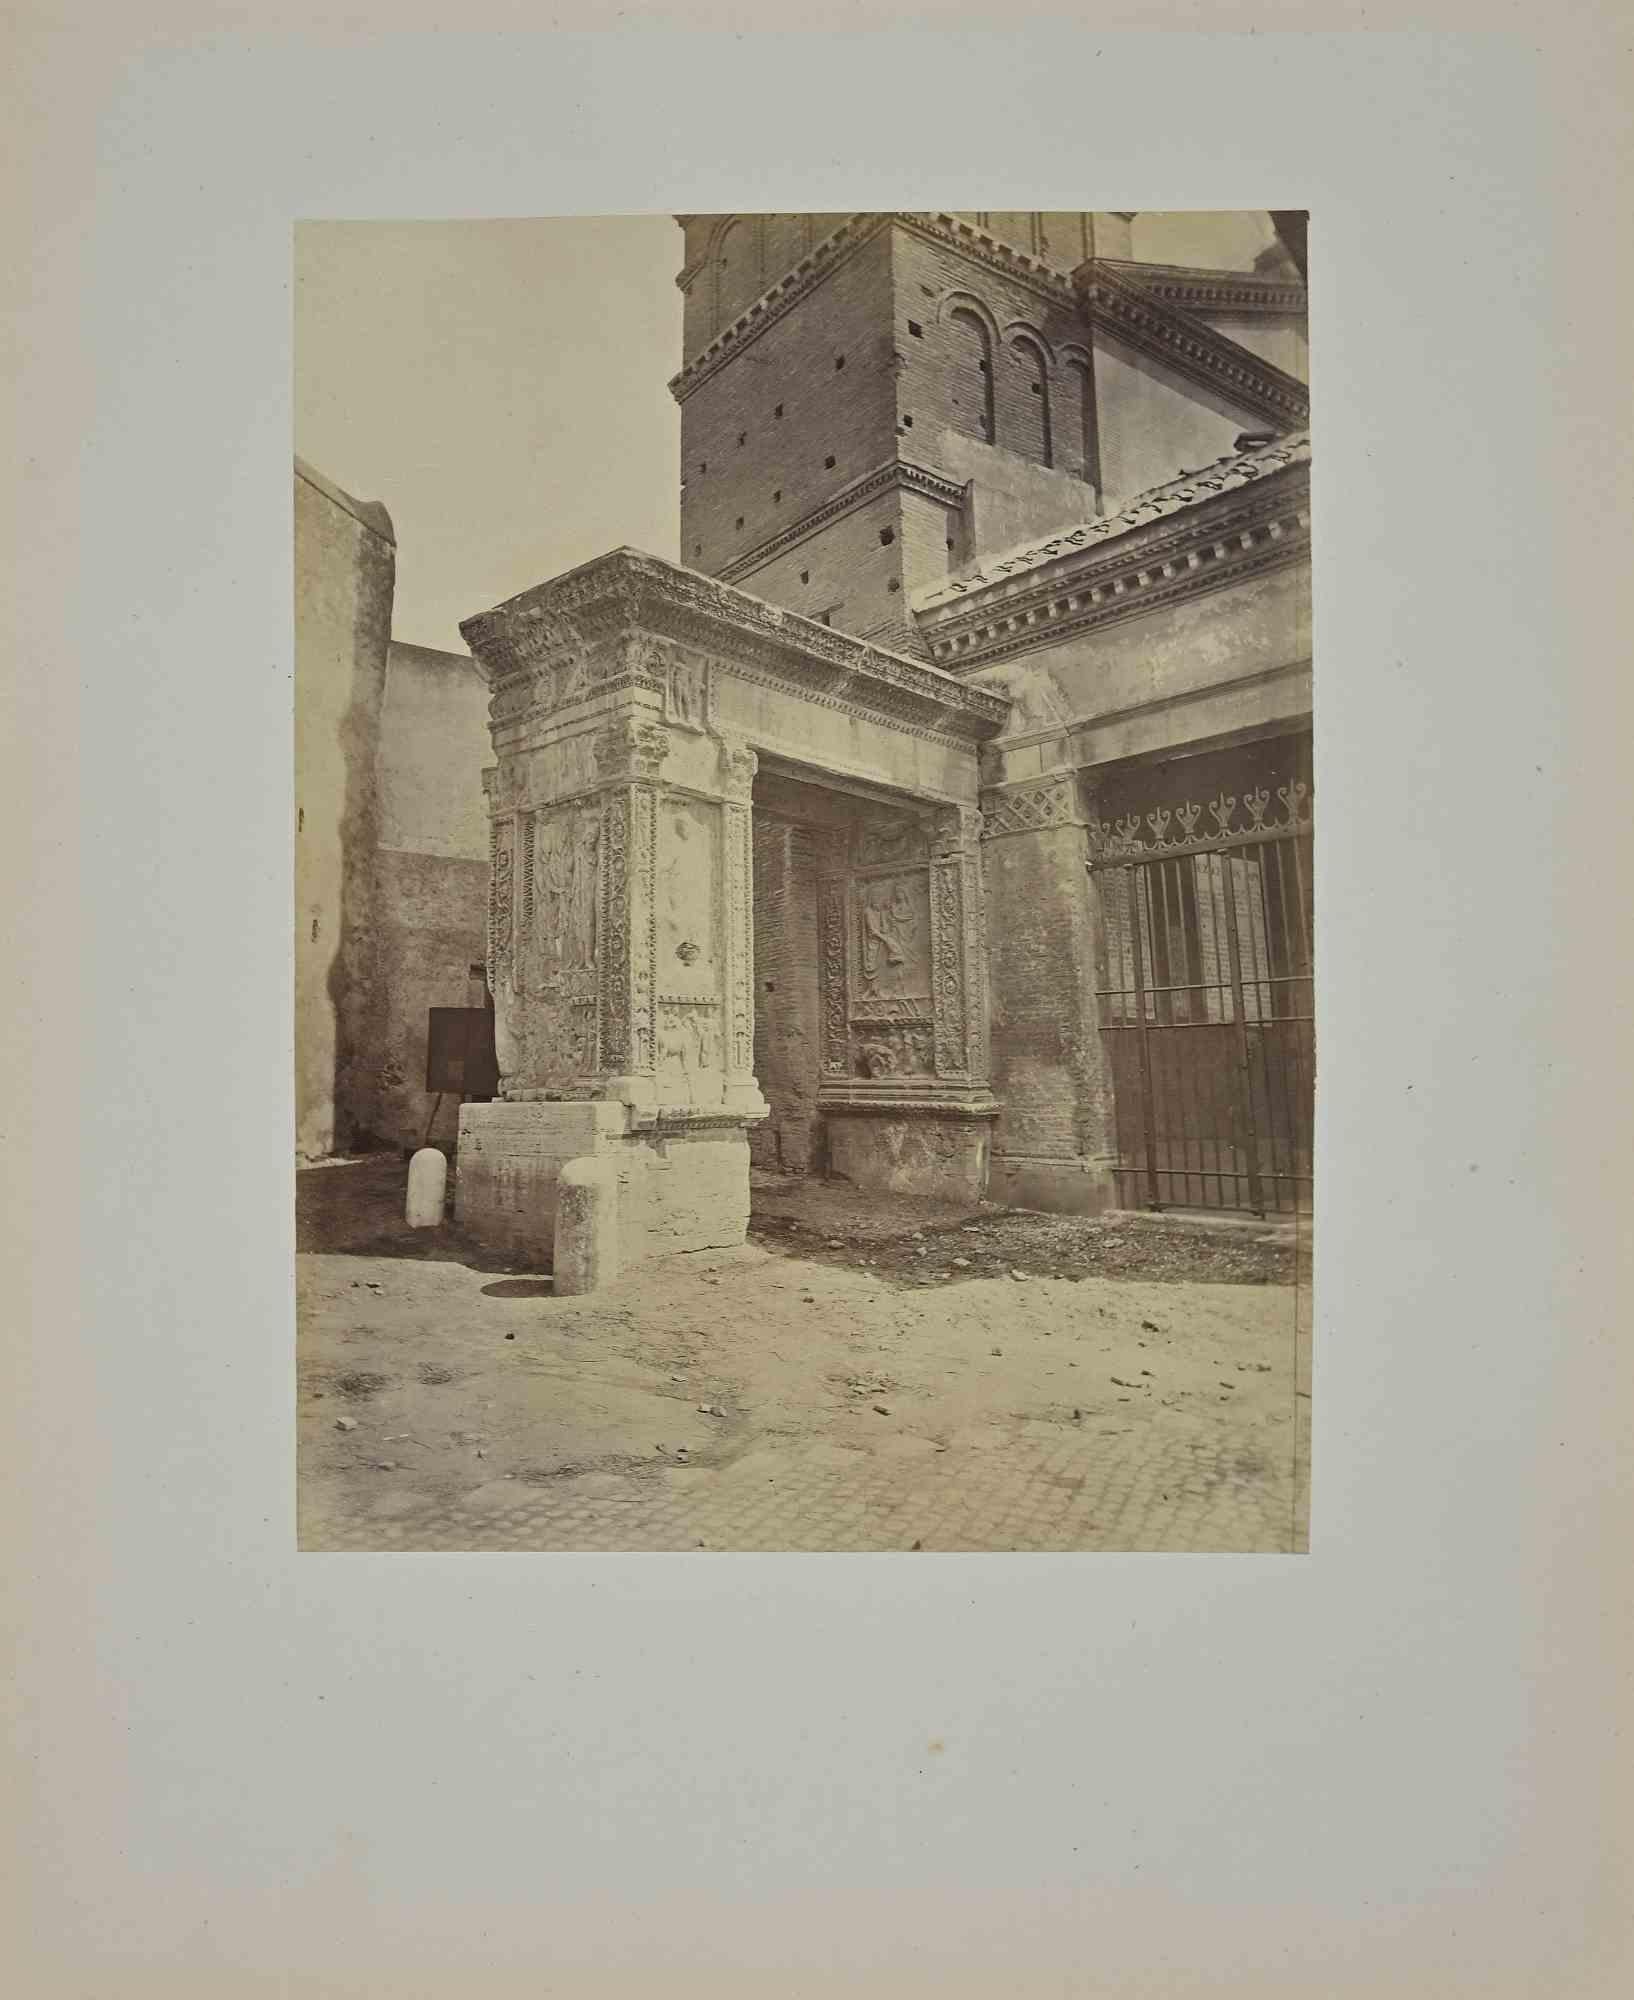 Francesco Sidoli Black and White Photograph - View of Portico d'Ottavia - Vintage Photograph by F. Sidoli- Late 19th Century